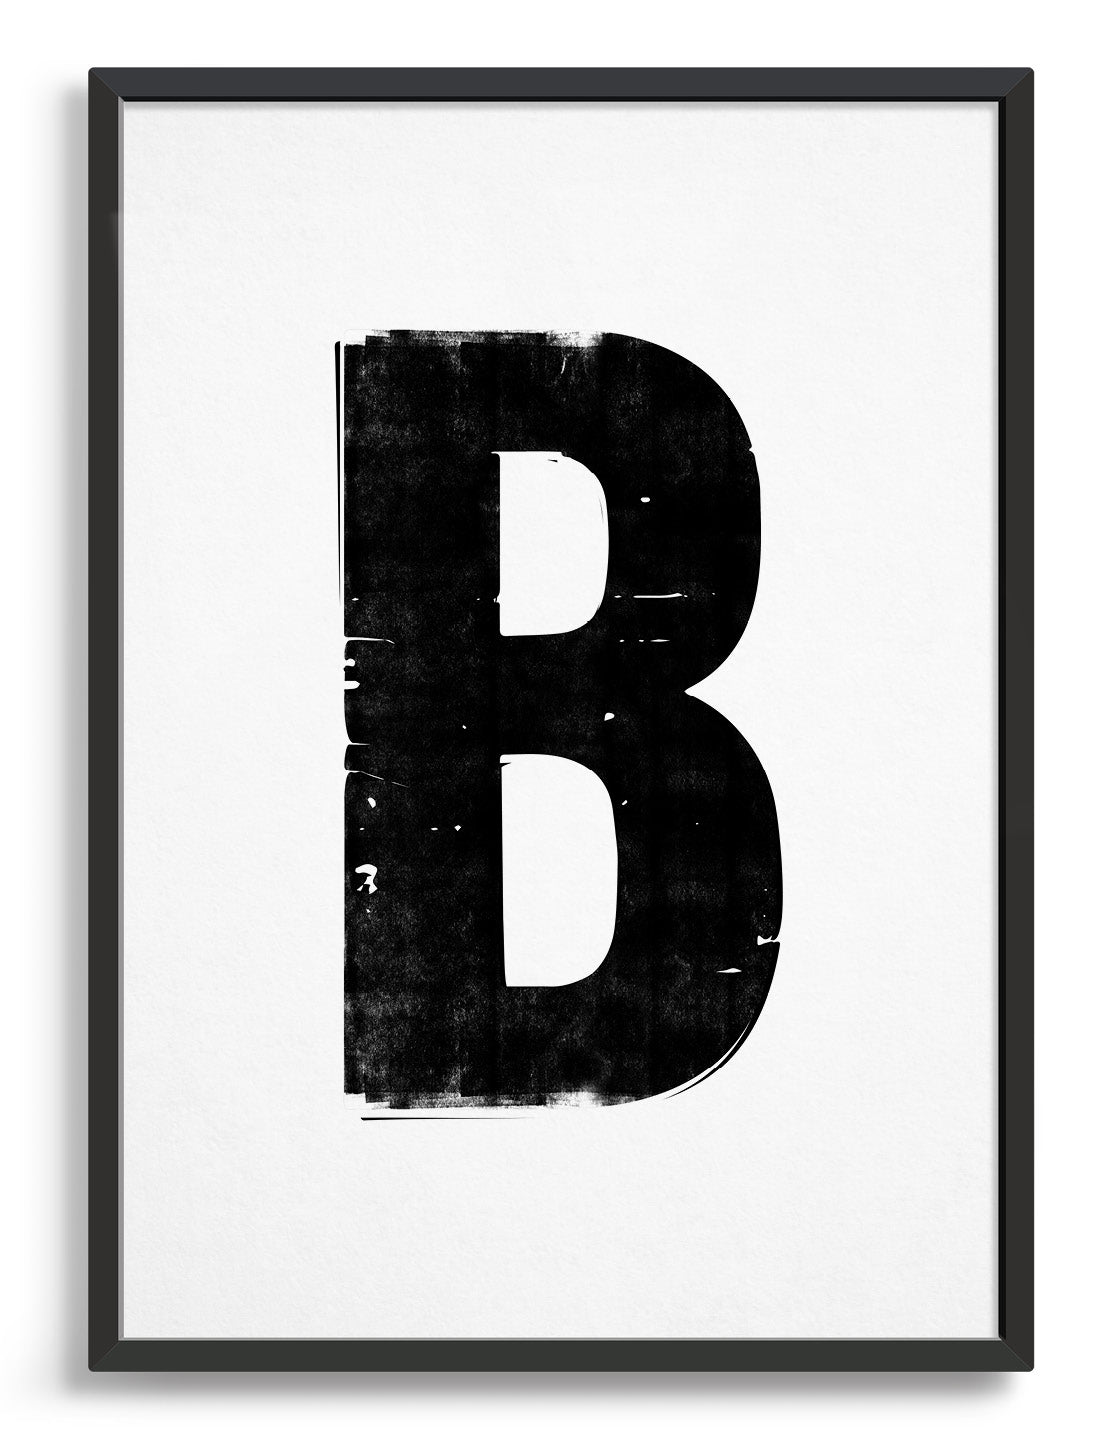 letterpress style alphabet print in blank font against a white background. Image depicts the letter B